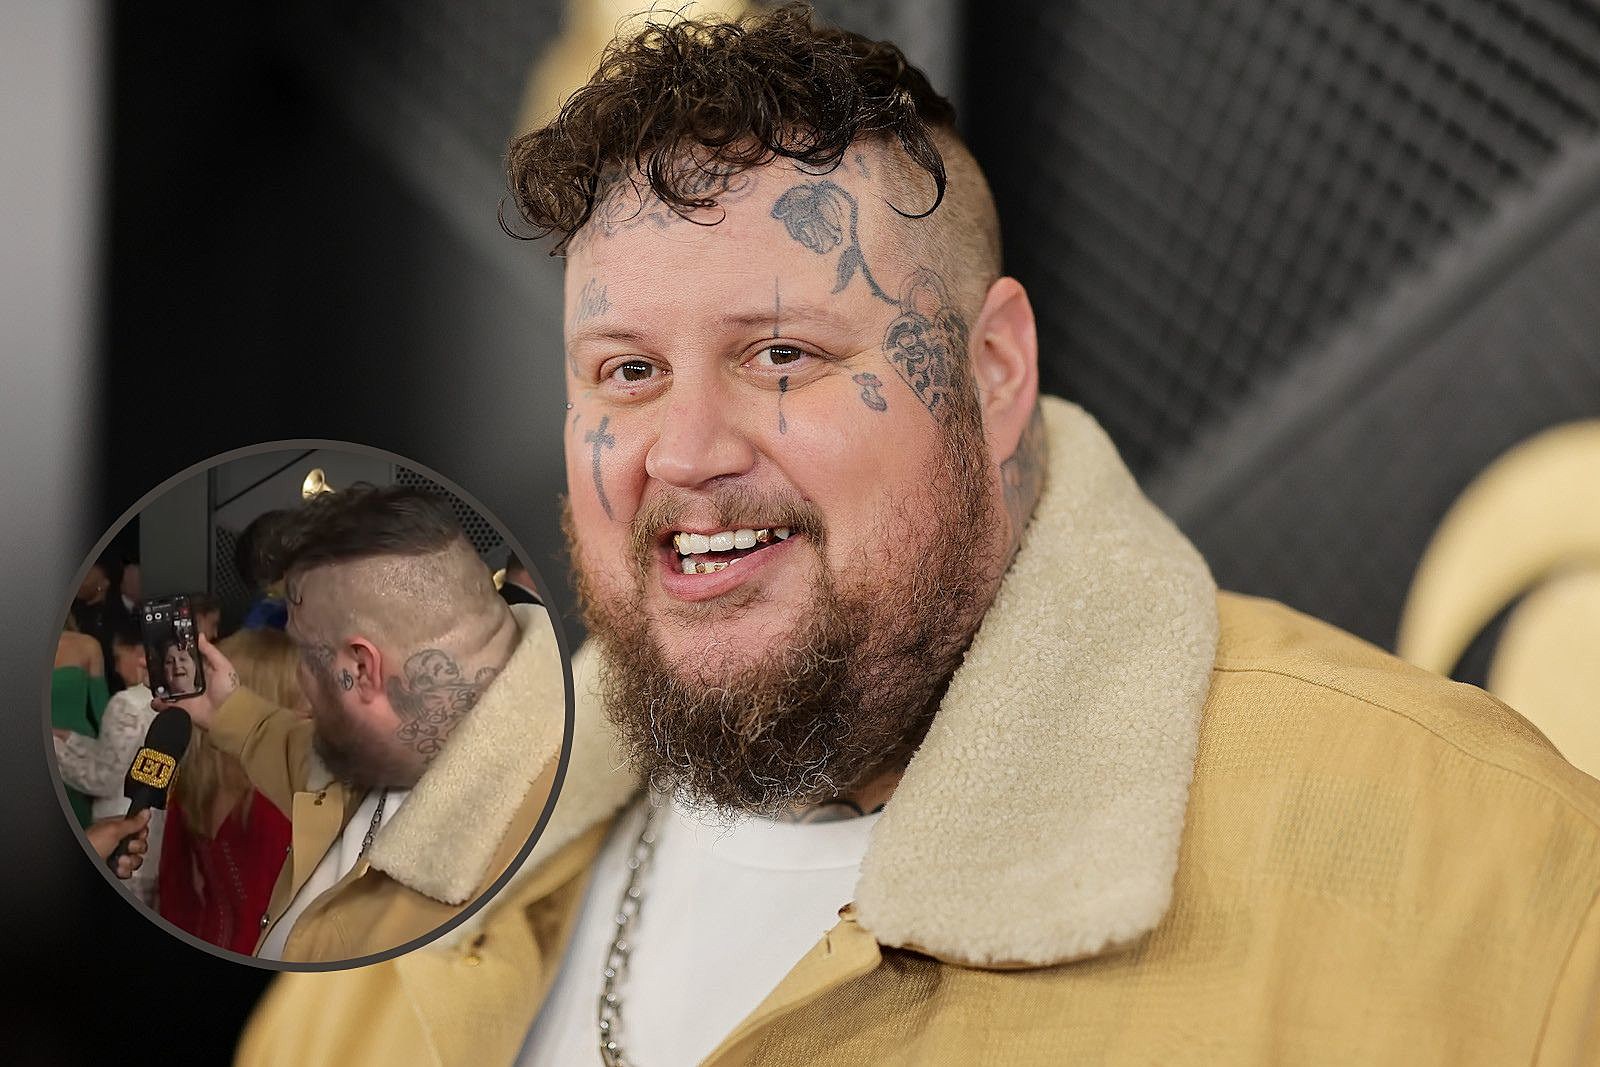 Why Jelly Roll's Mom Didn't Make it to the Grammys After All